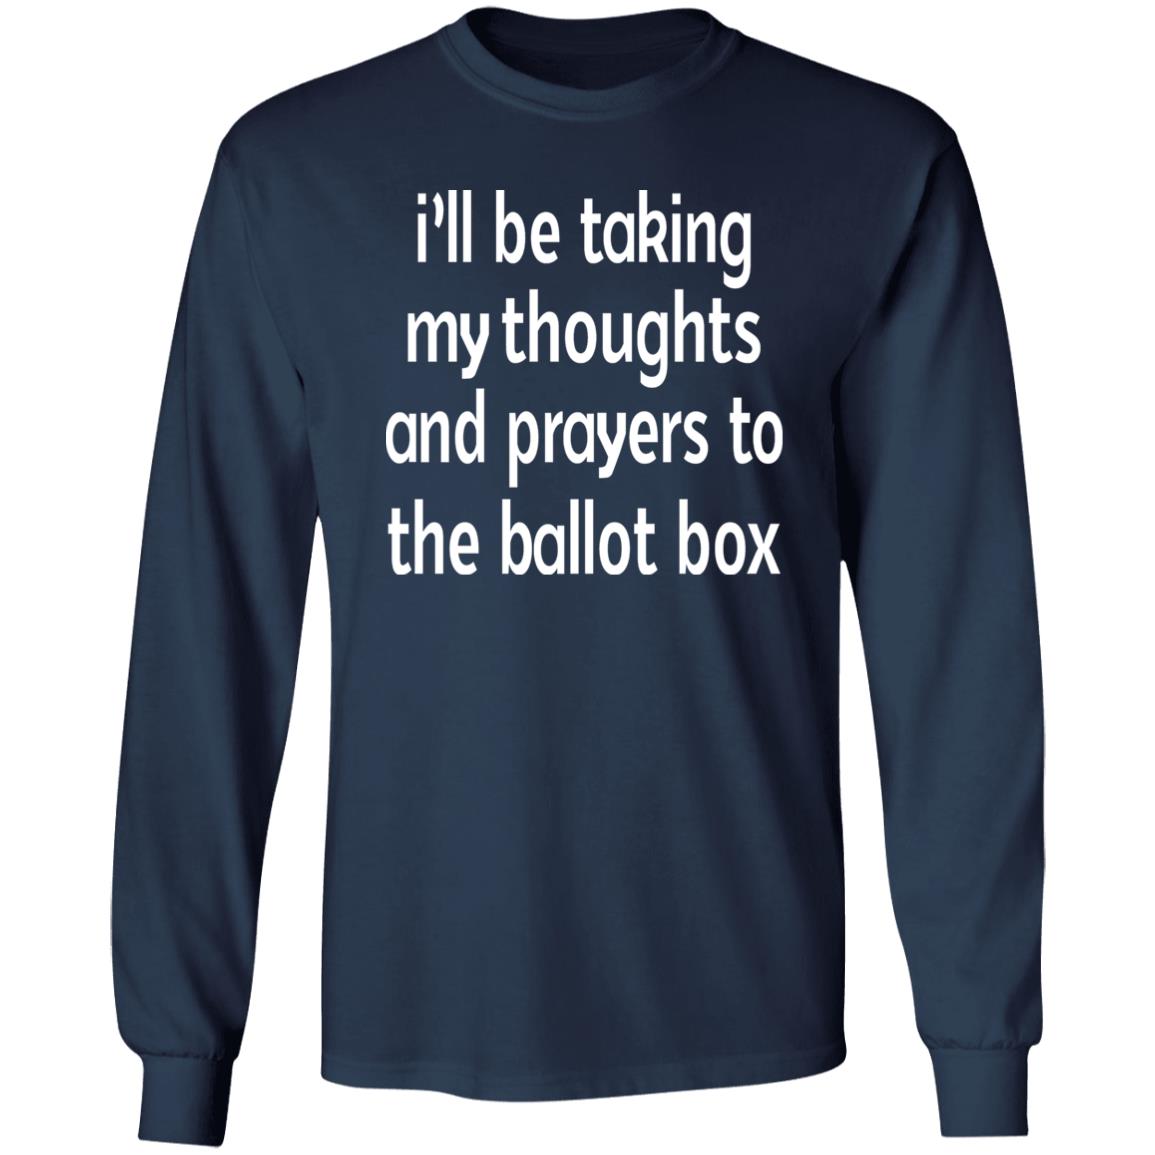 I'll Be Taking My Thoughts And Prayers To The Ballot Box Shirt Emily Winston